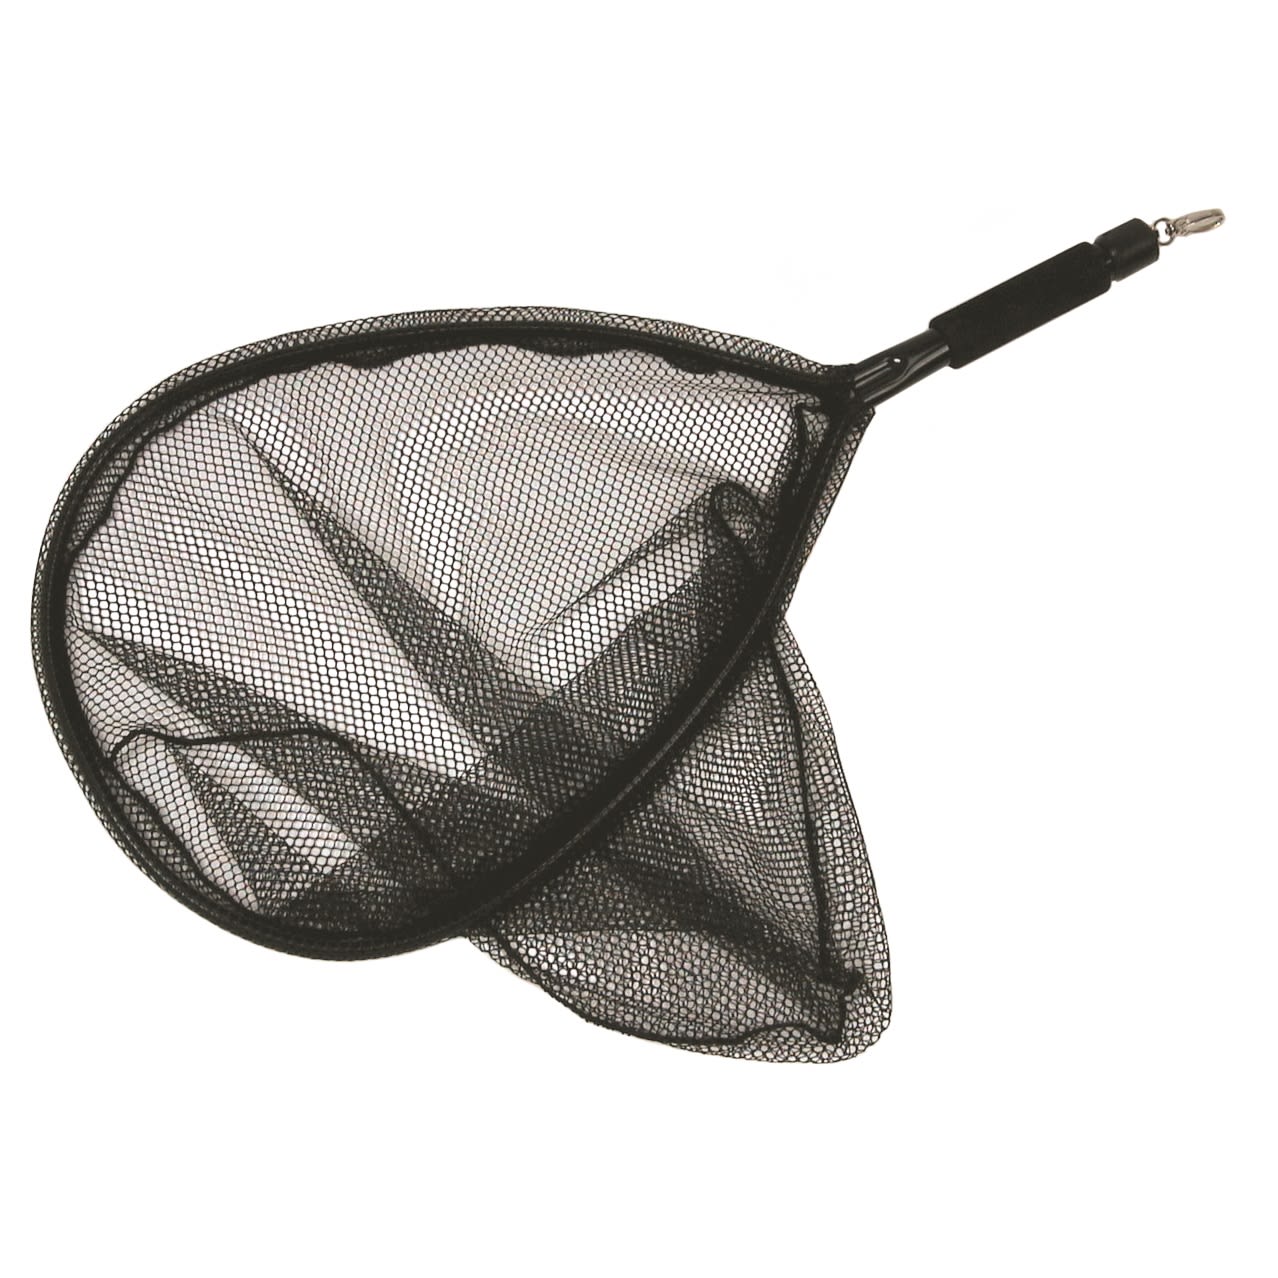 Pool 12 Fishing Net With Built-In Scale - Outnorth